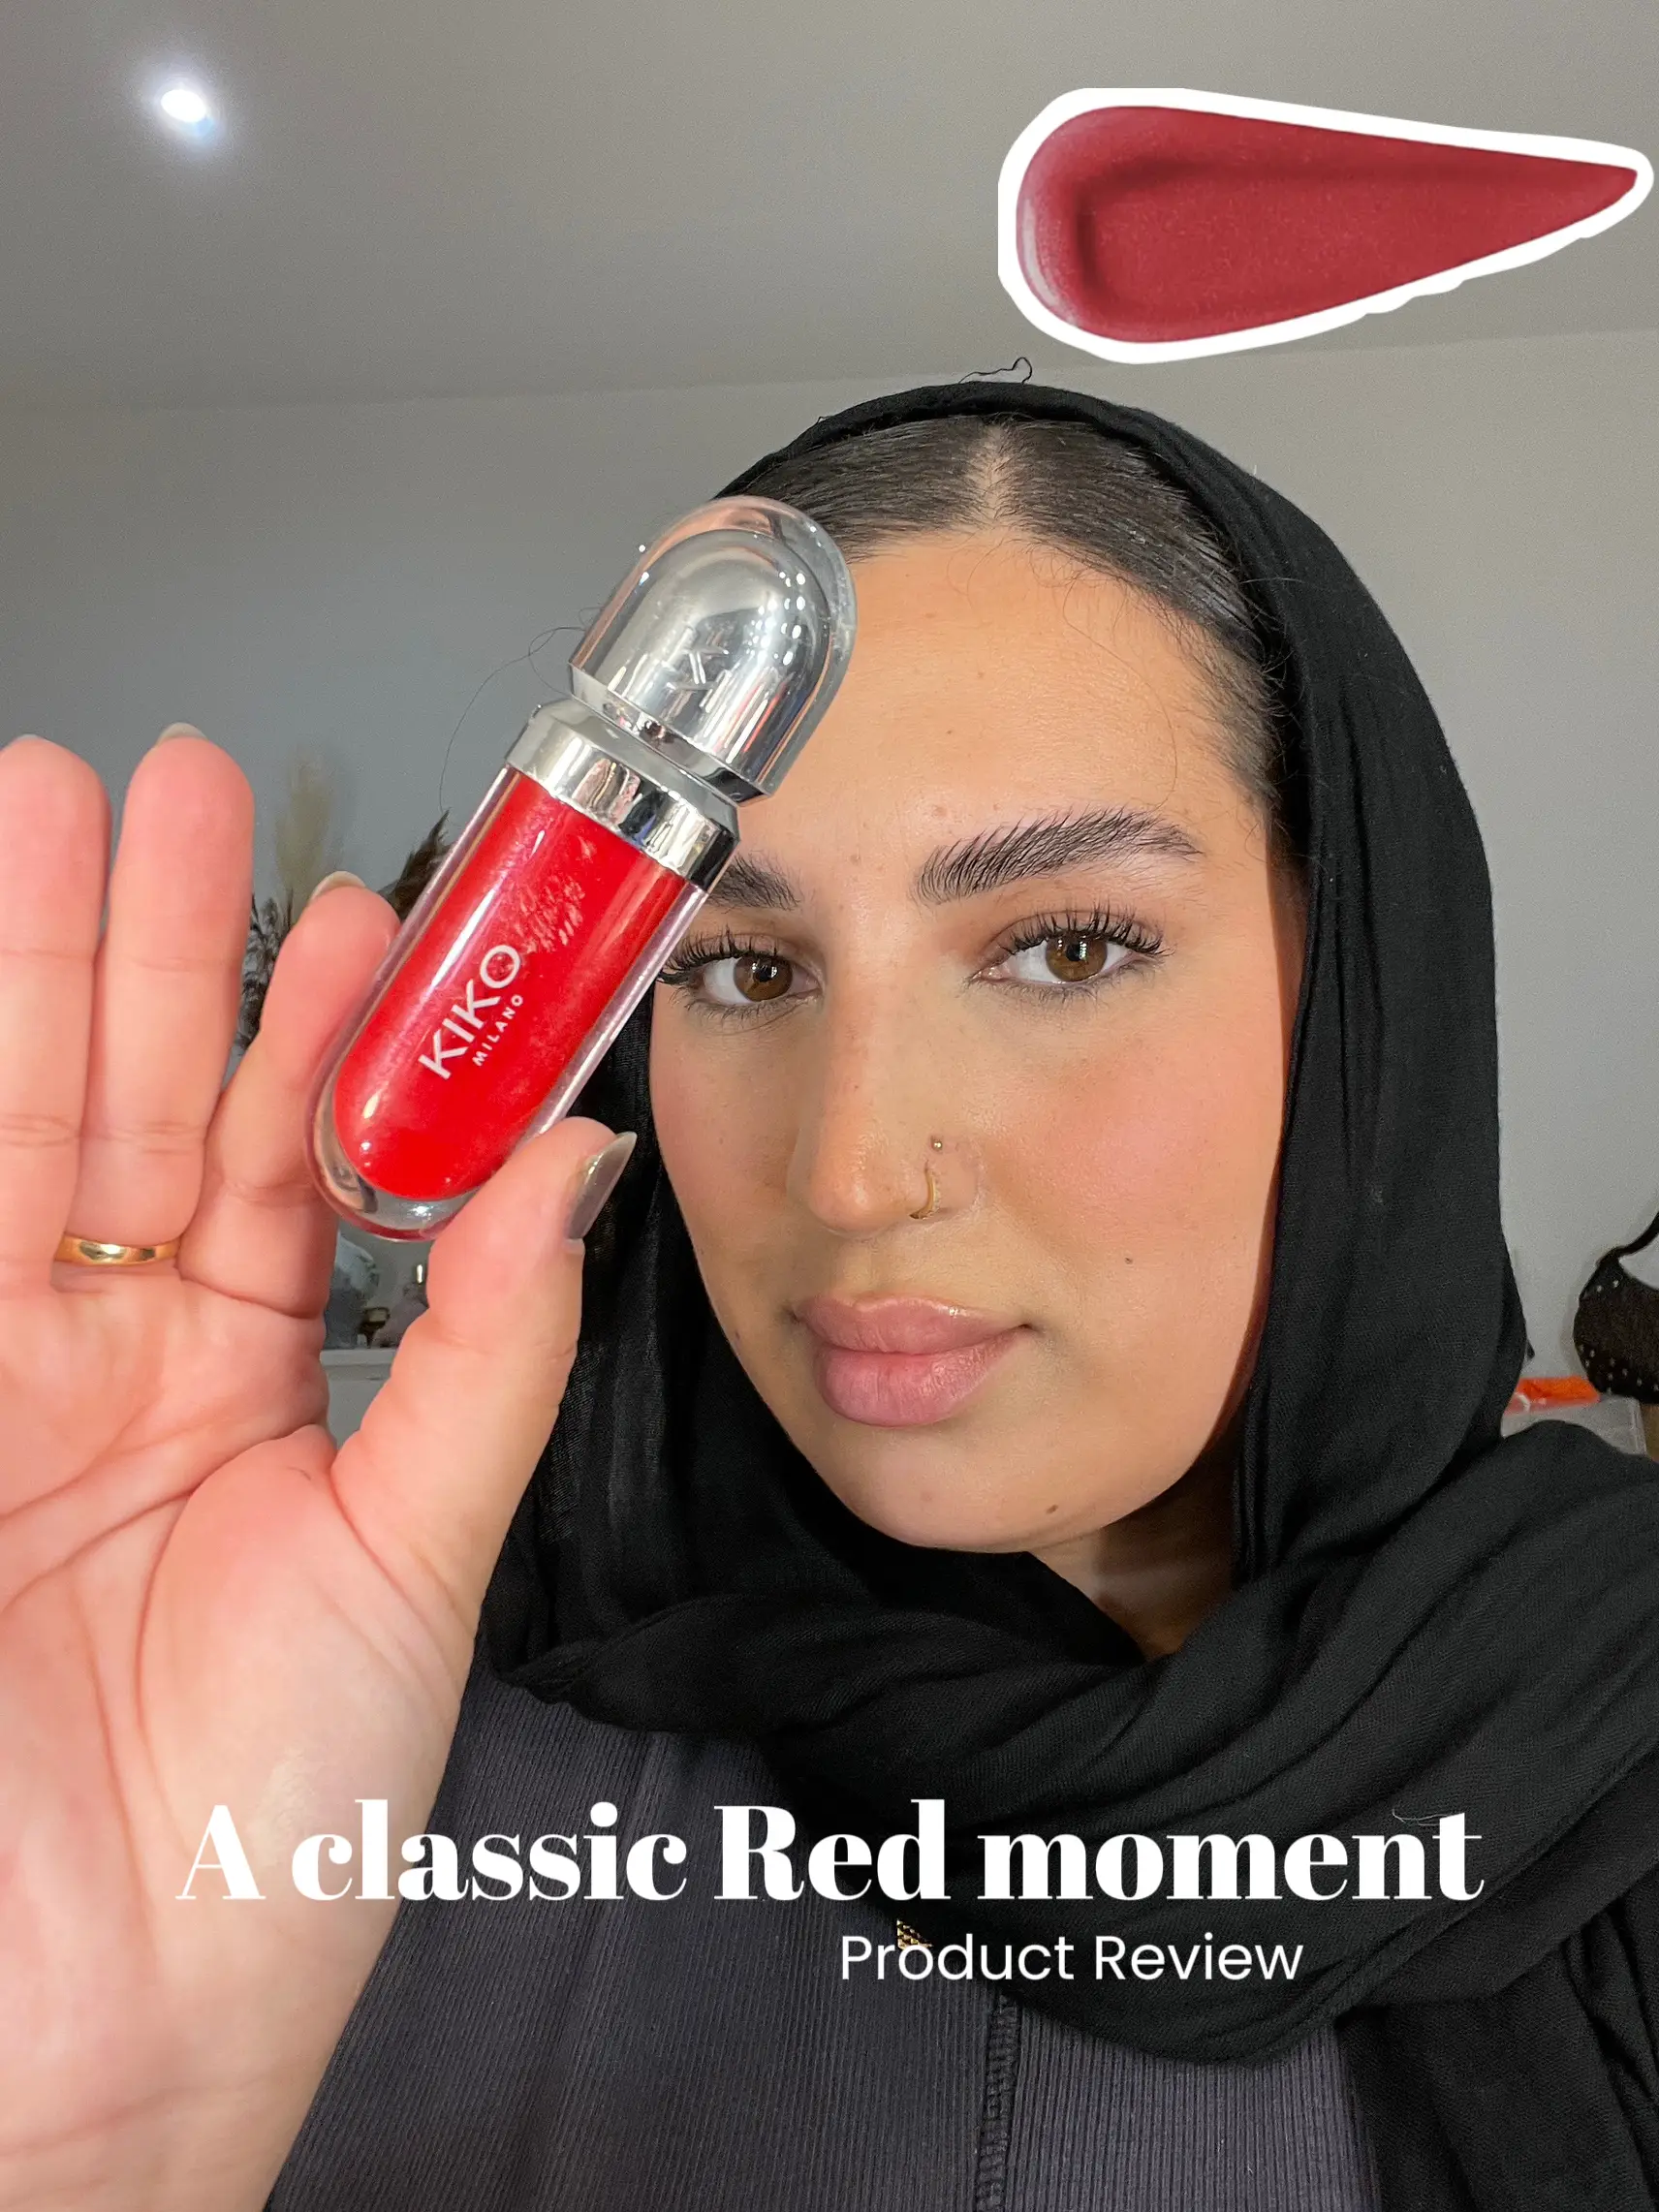 A classic Red matte 👄, Gallery posted by Fatimaxbeauty